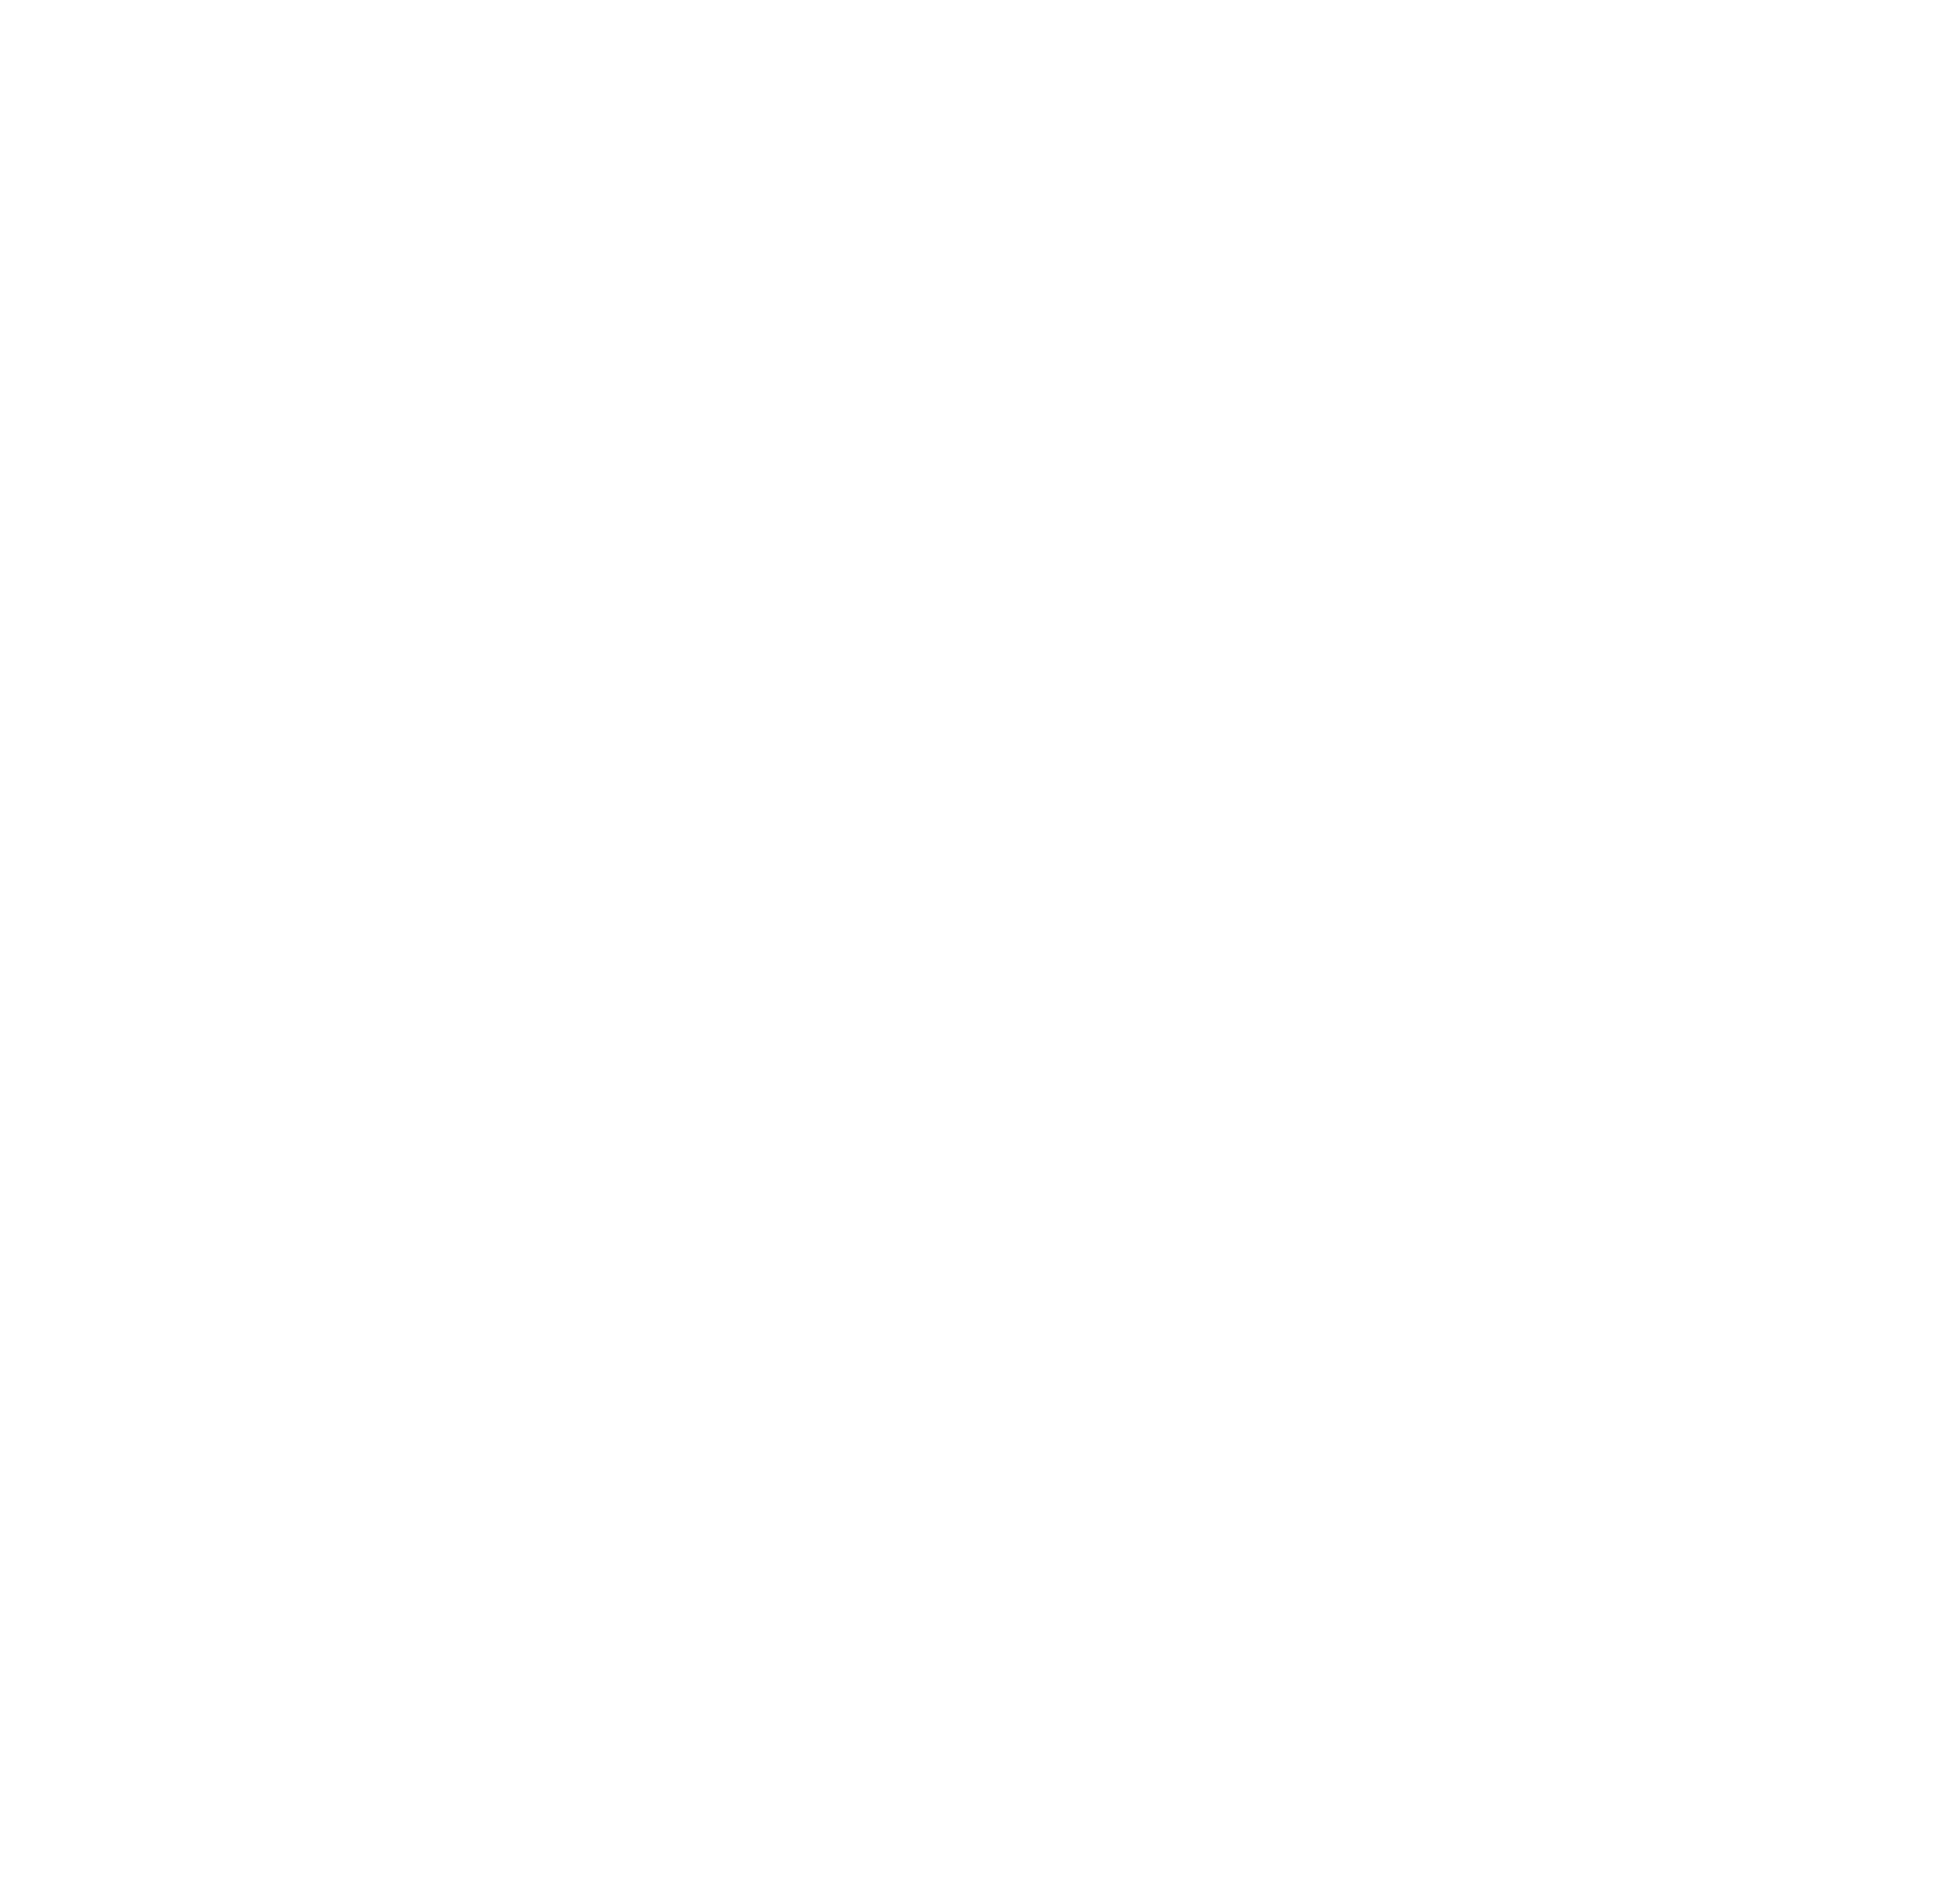 Icon Representing Hands Raised To Volunteer Sign